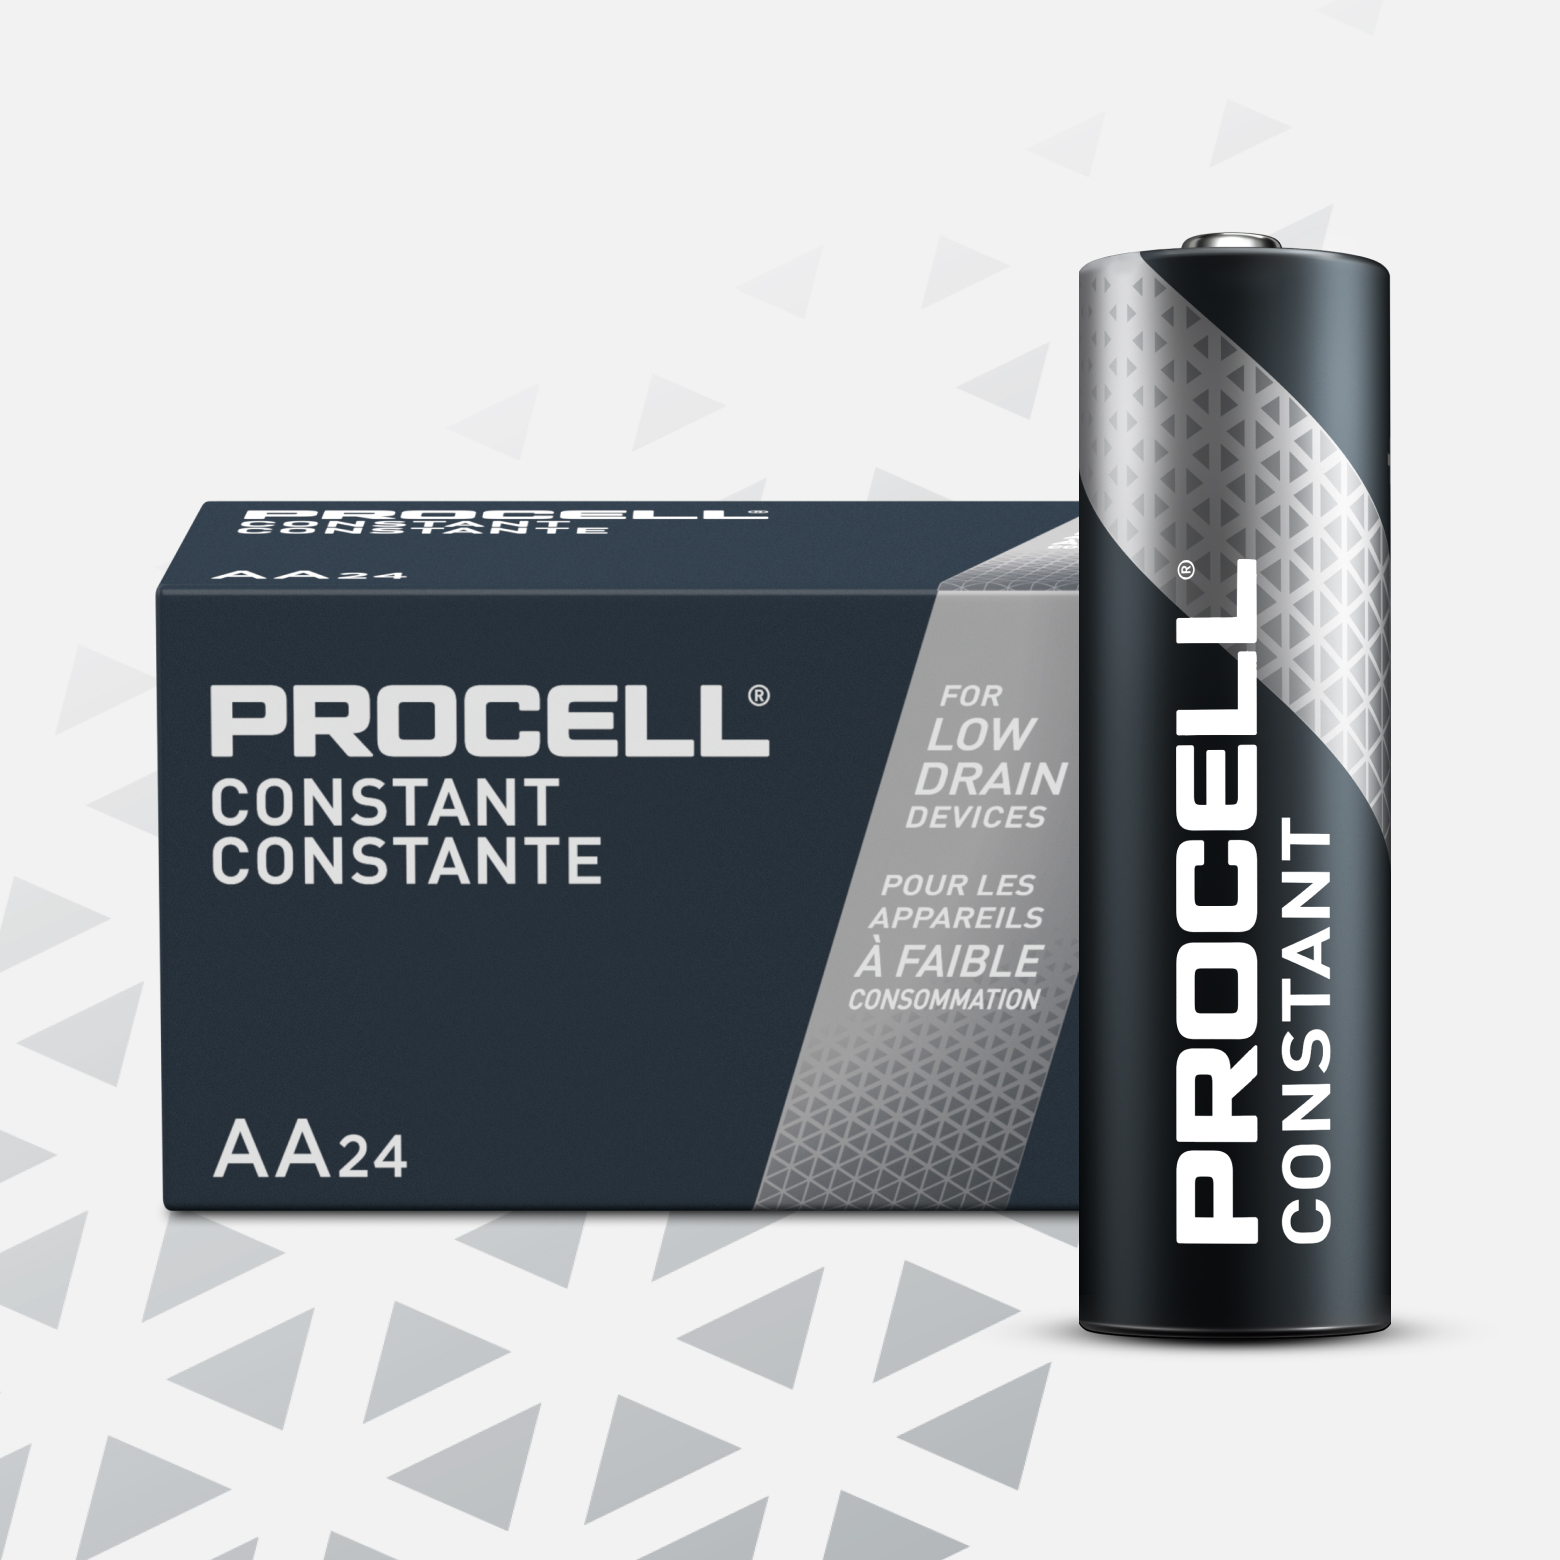 Duracell Procell AAA 1.5V Alkaline Batteries - Box of 24